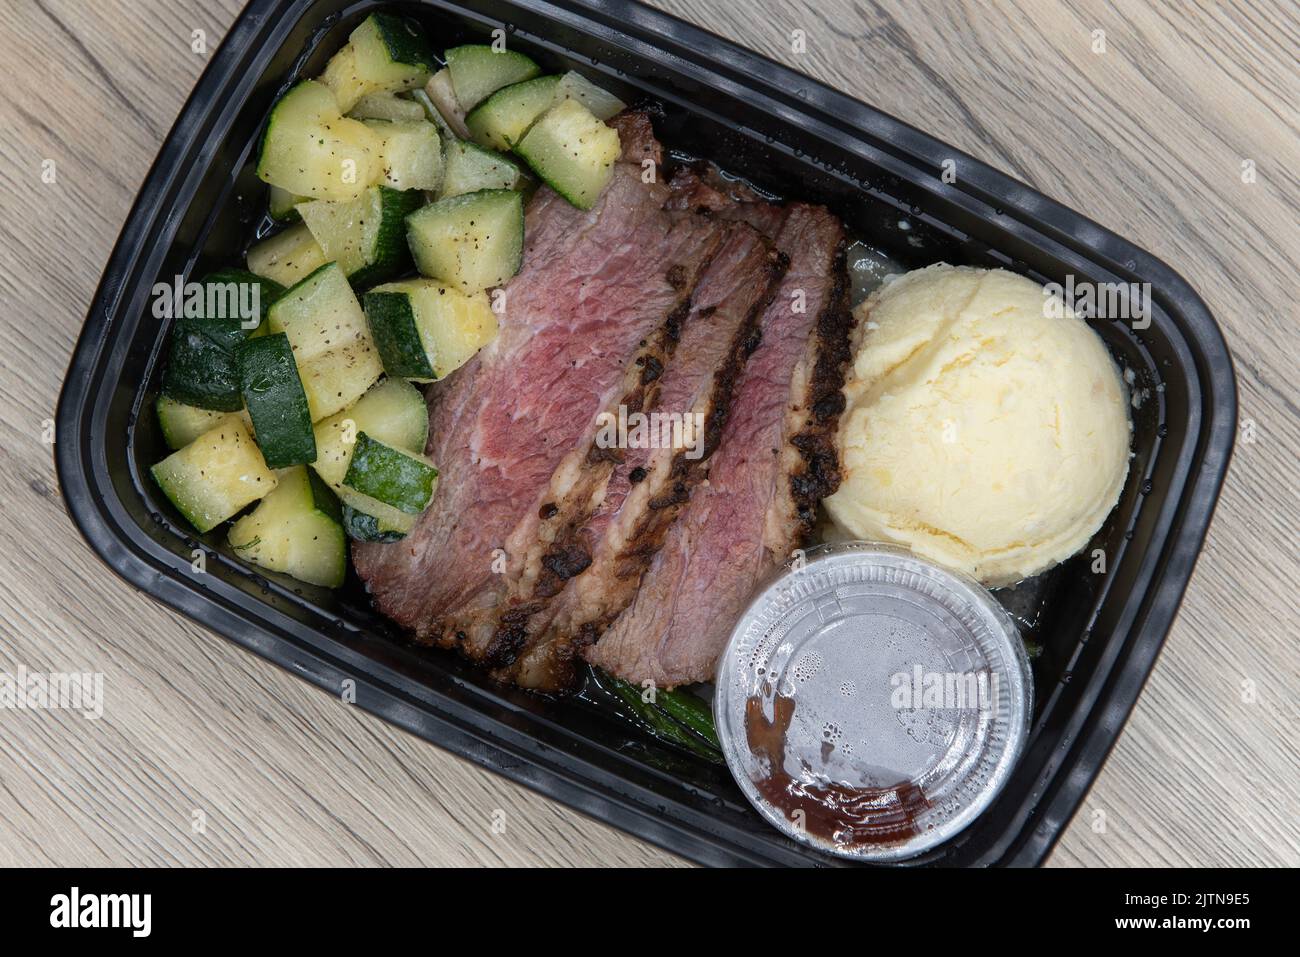 Overhead view of take out order of Tri tip steak with mashed potatoes is conveniently packed in a microwavable container. Stock Photo